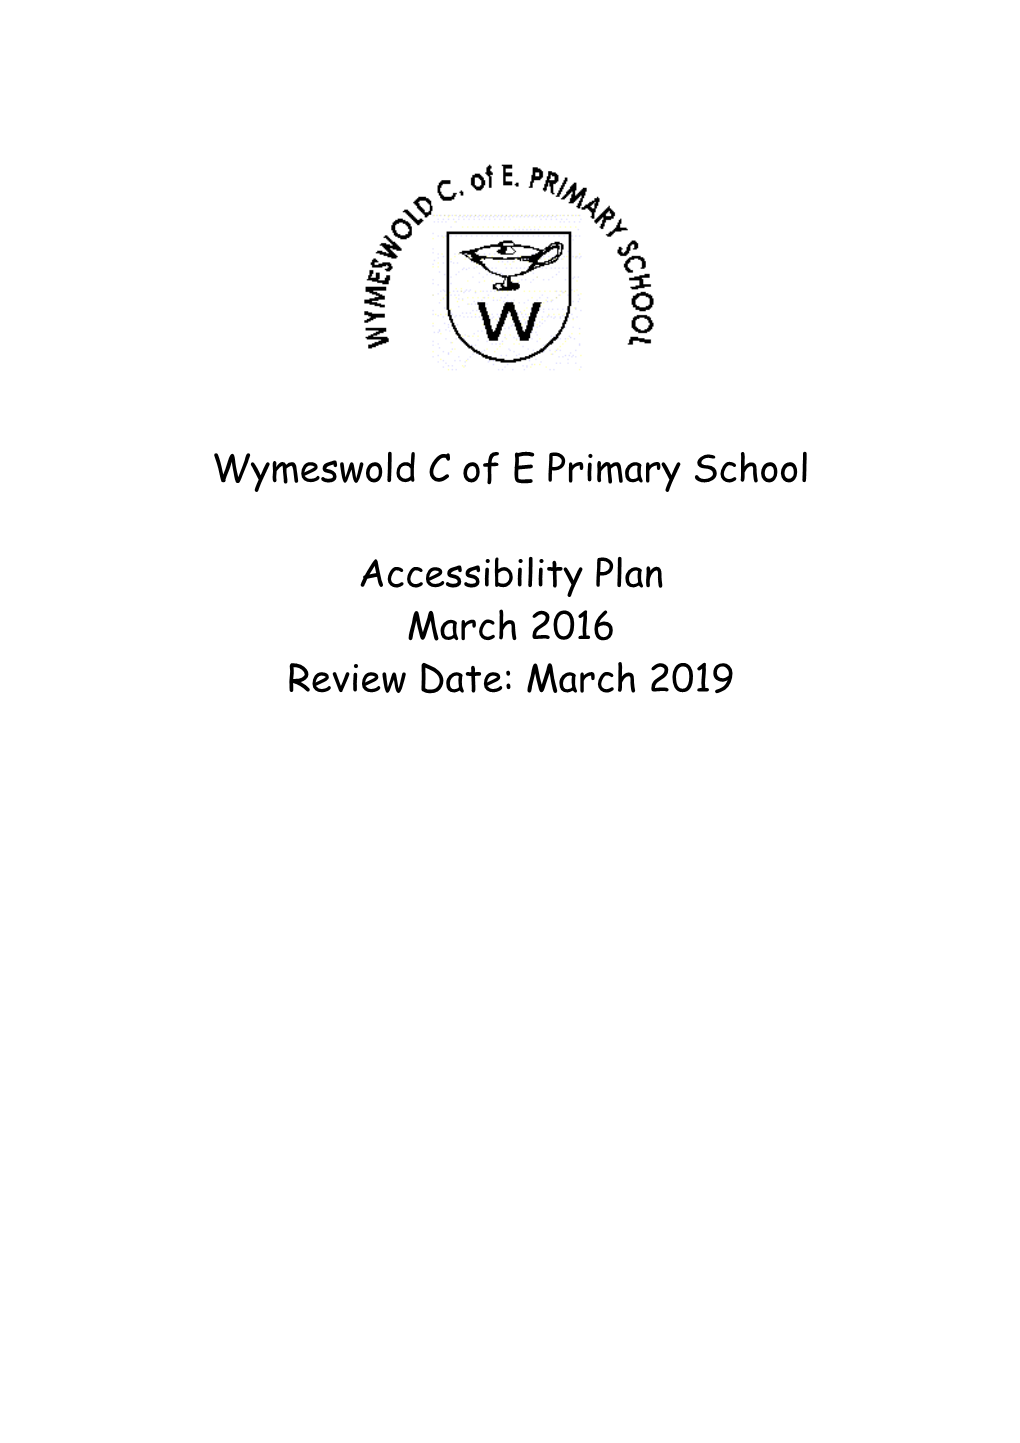 Wymeswold C of E Primary School Draft Accessibility Plan